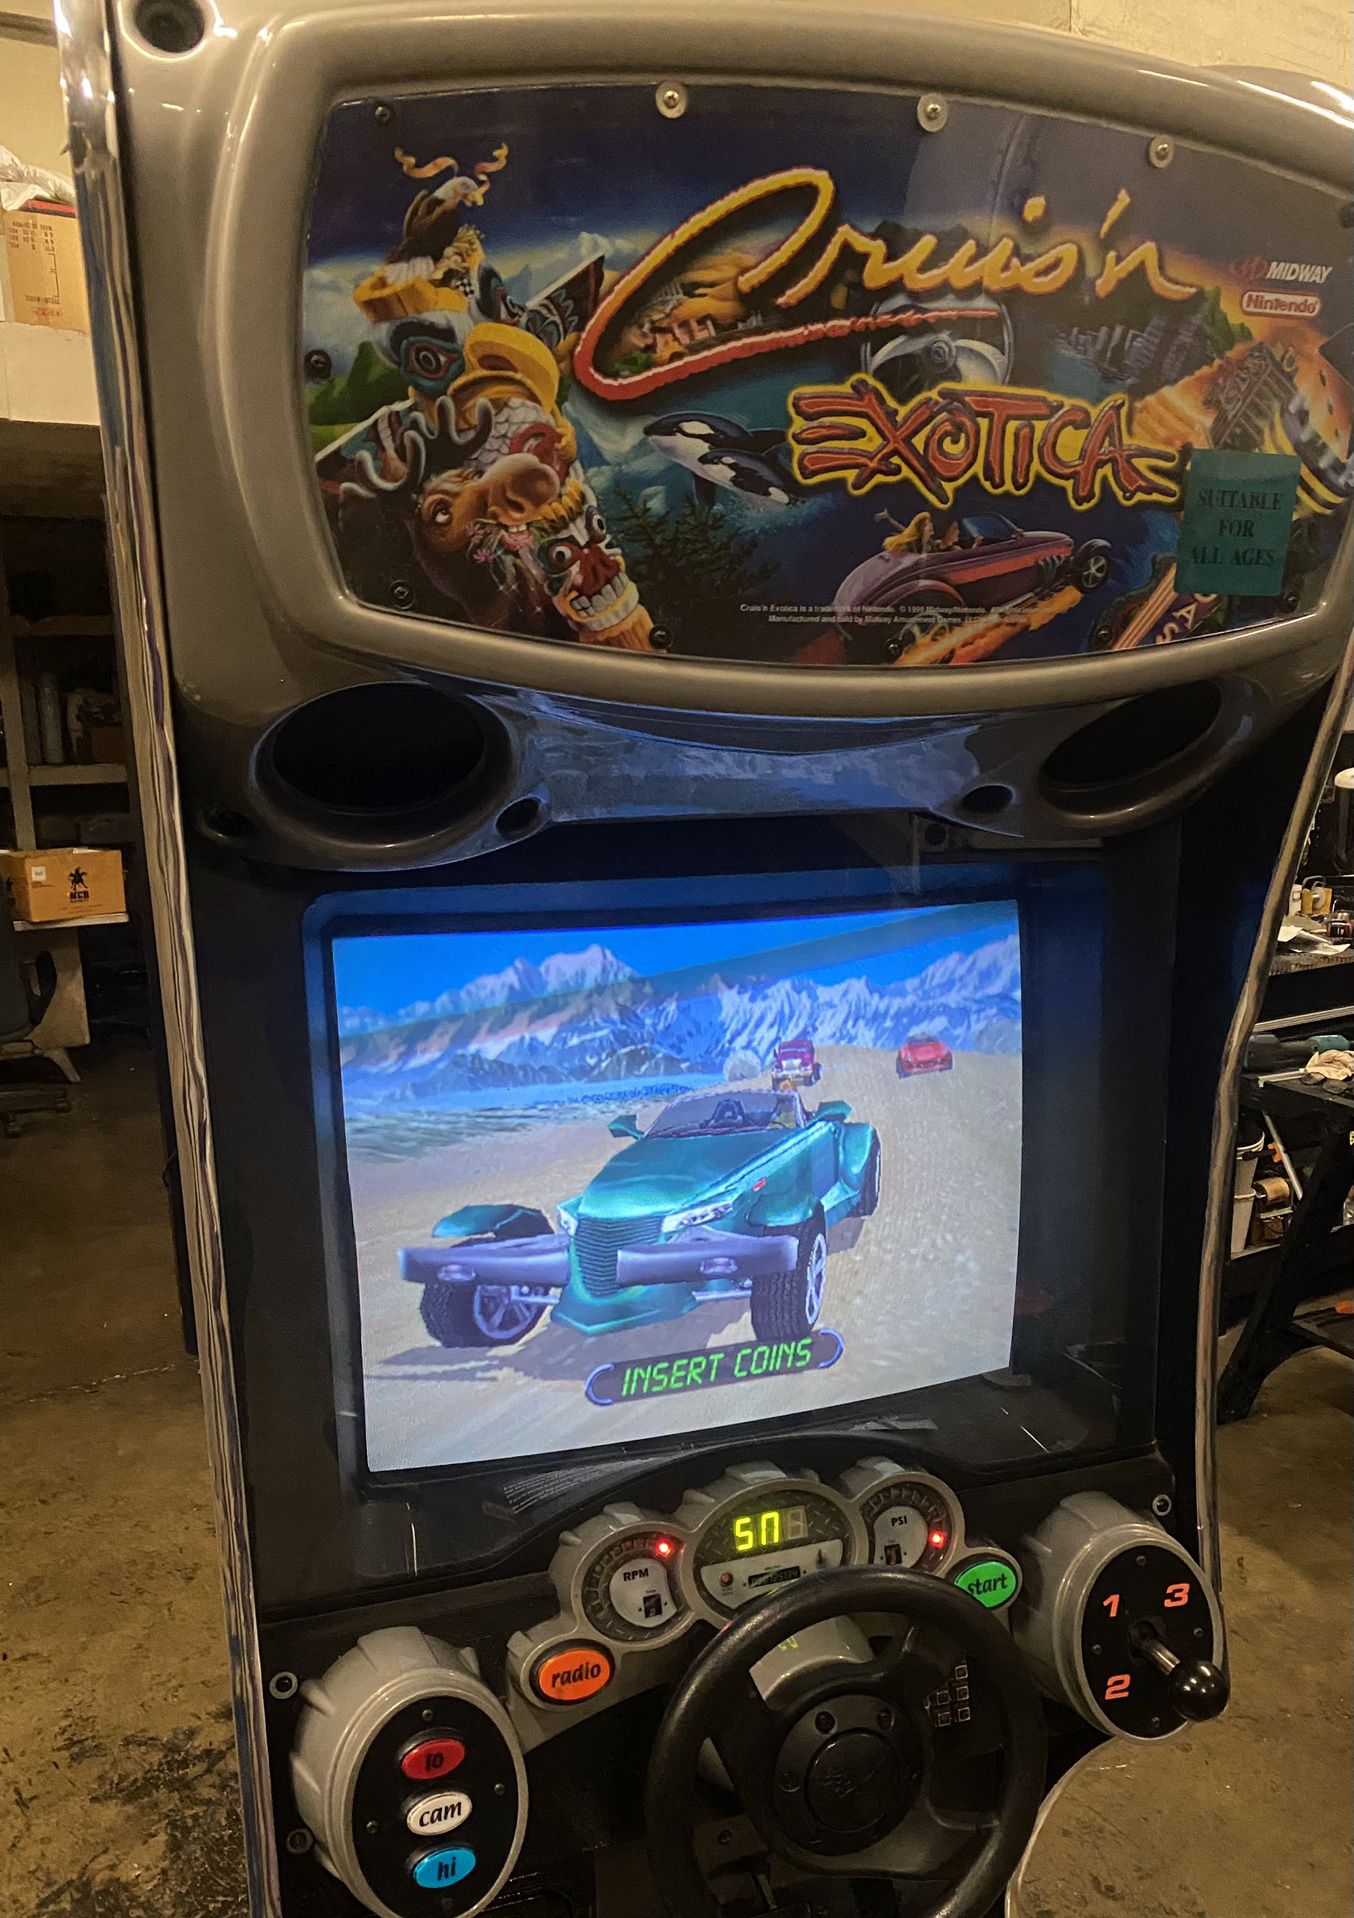 Midway Cruis'n Exotica Arcade Driving Video Game Machine for Sale